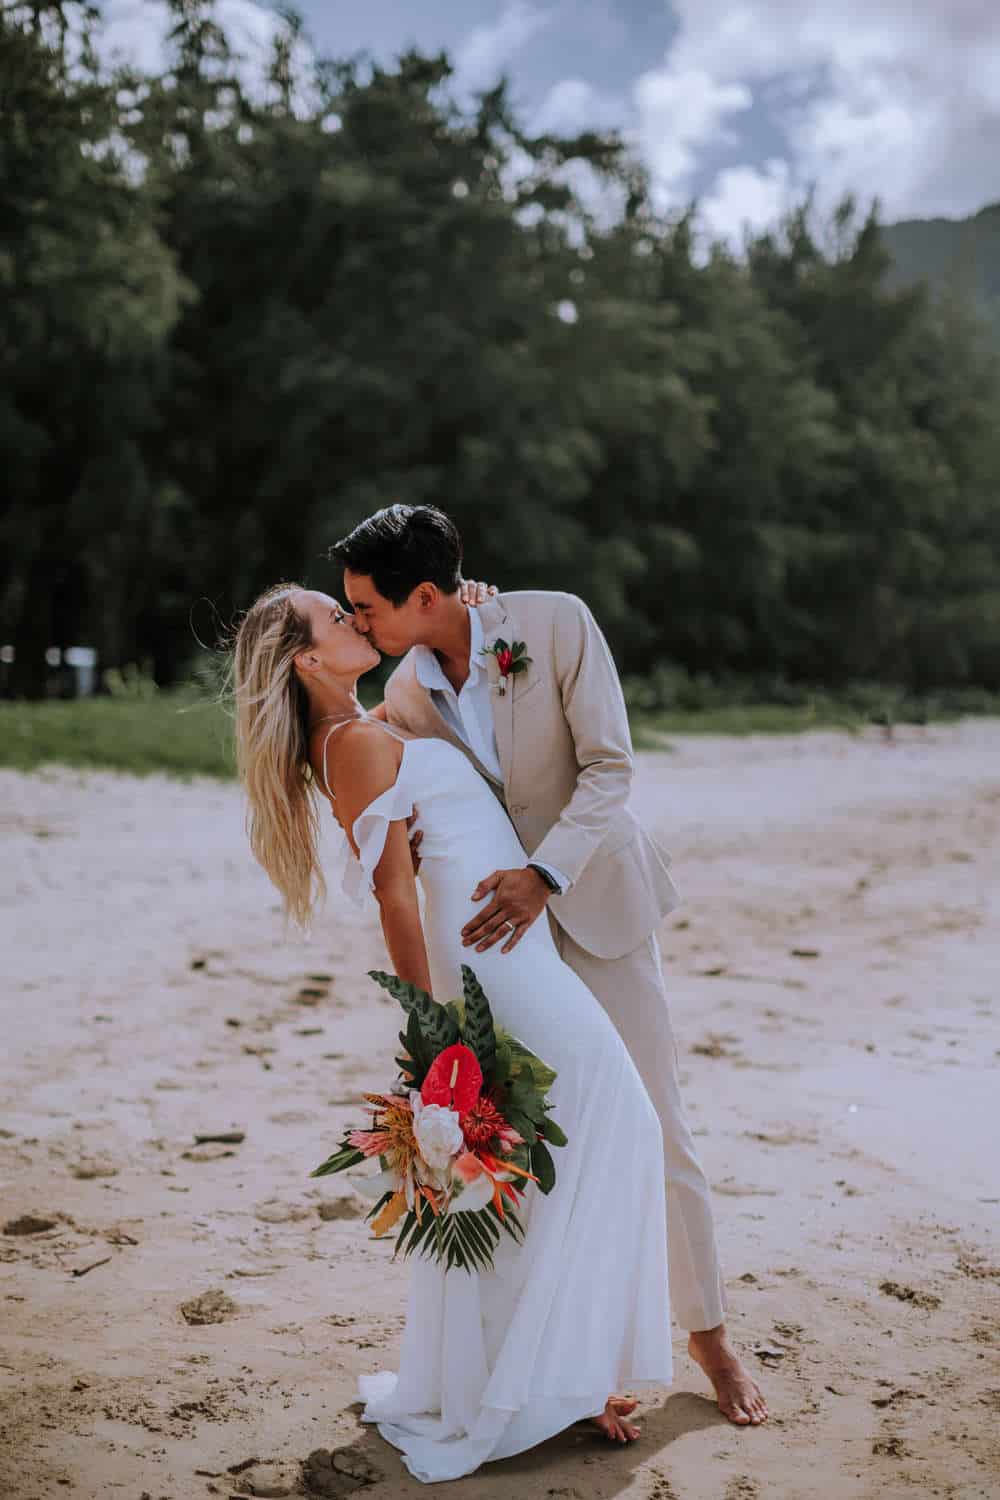 Budgeting tips for wedding/elopement by Anela Benavides, Hawaii based photographer